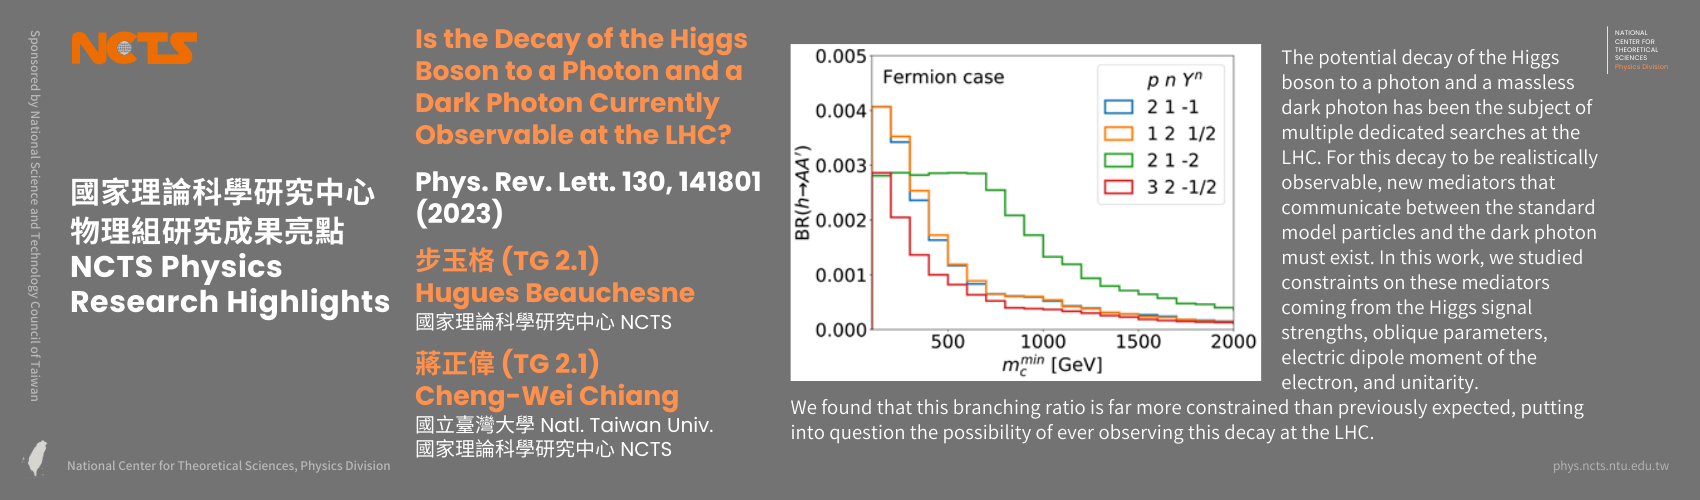 [NCTS Physics Research Highlights] Hugues Beauchesne & Cheng-Wei Chiang 'Is the Decay of the Higgs Boson to a Photon and a Dark Photon Currently Observable at the LHC', Phys. Rev. Lett. 130, 141801 (2023)